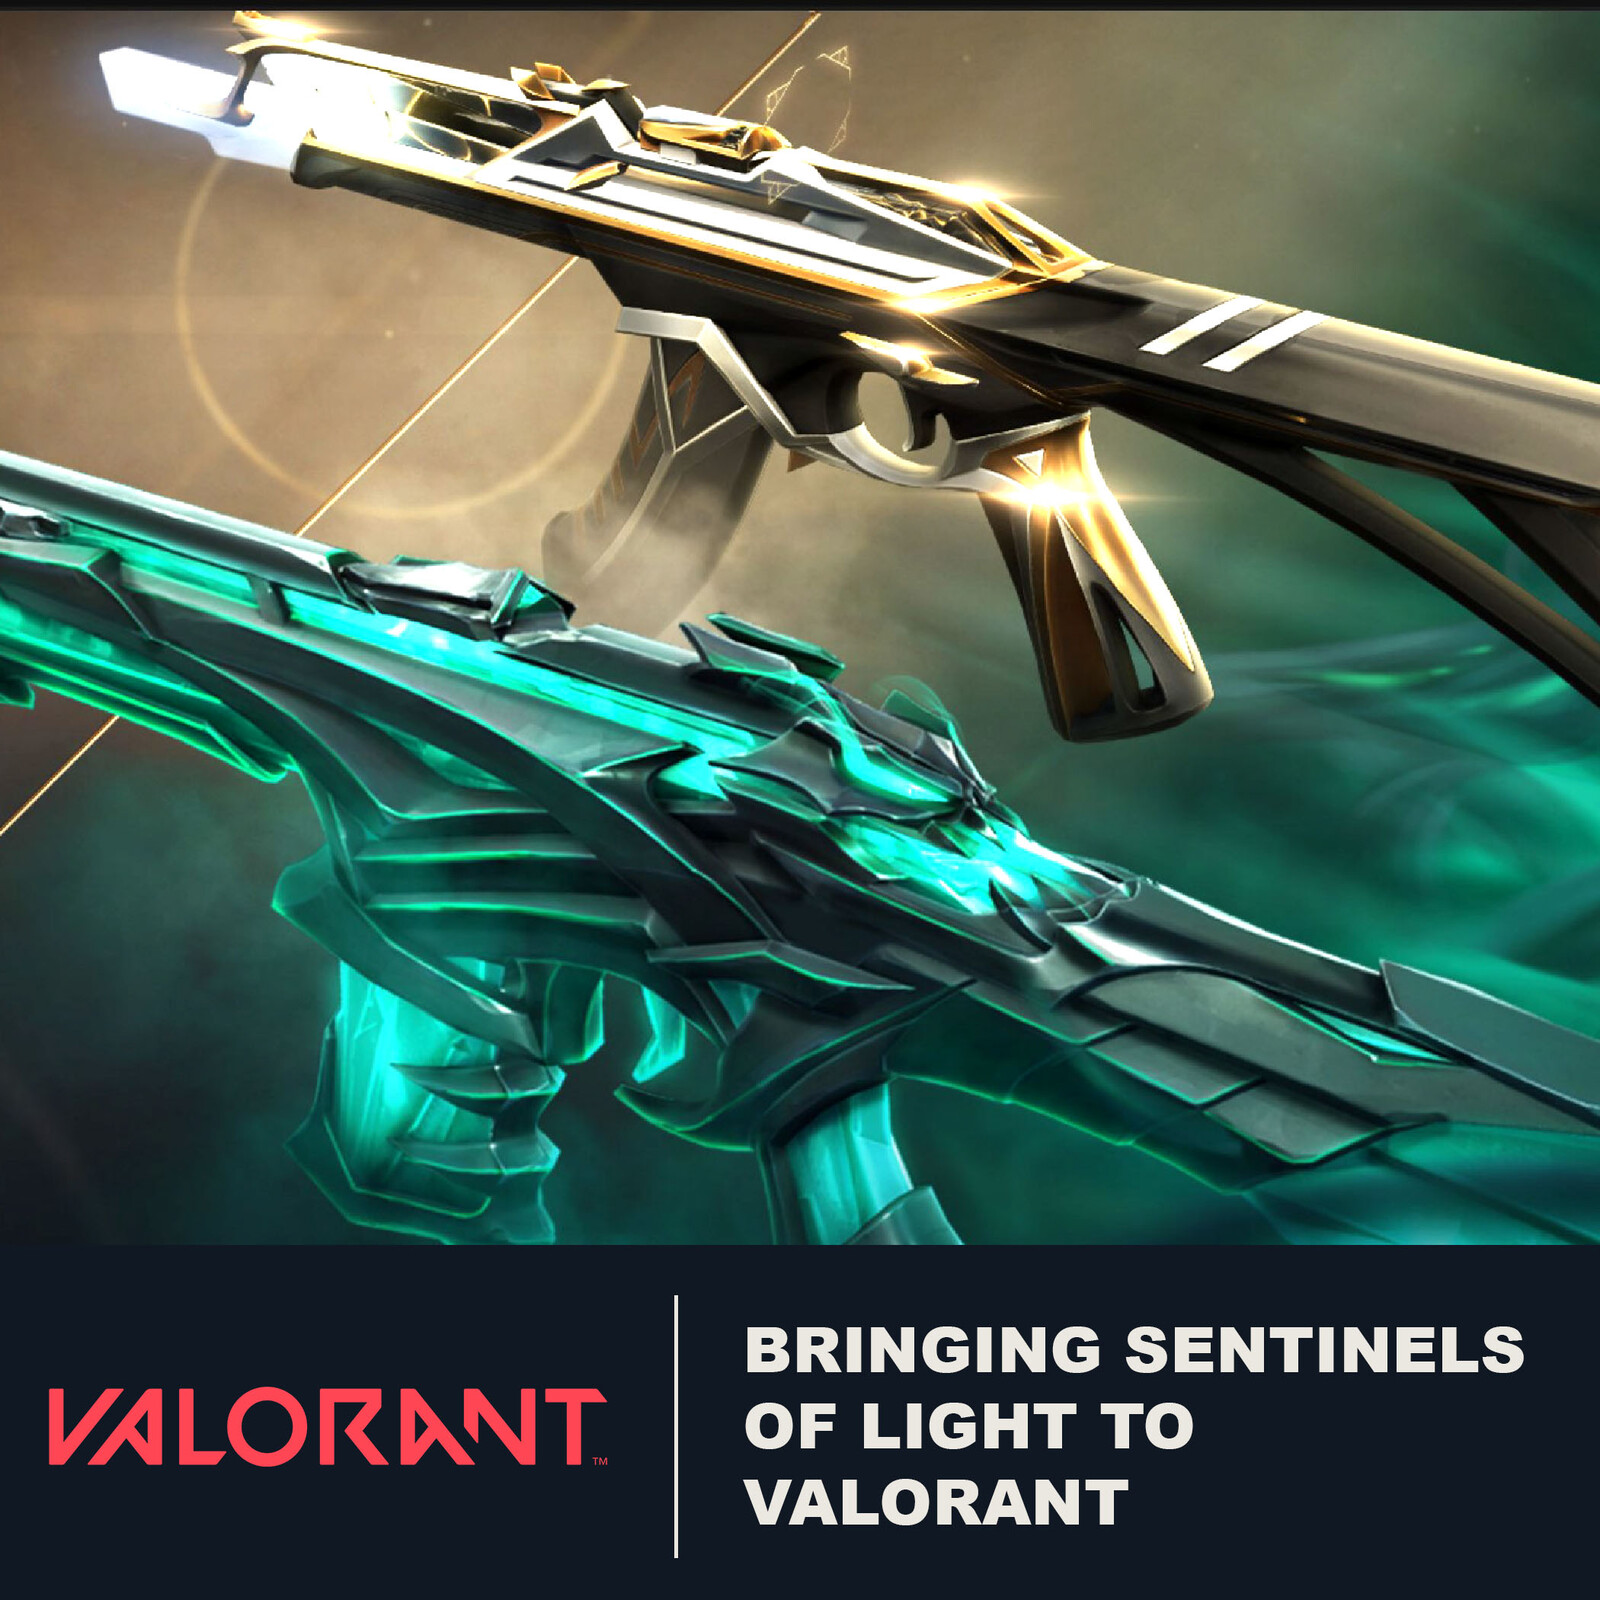 VALORANT - How we brought the Sentinels of Light to VALORANT